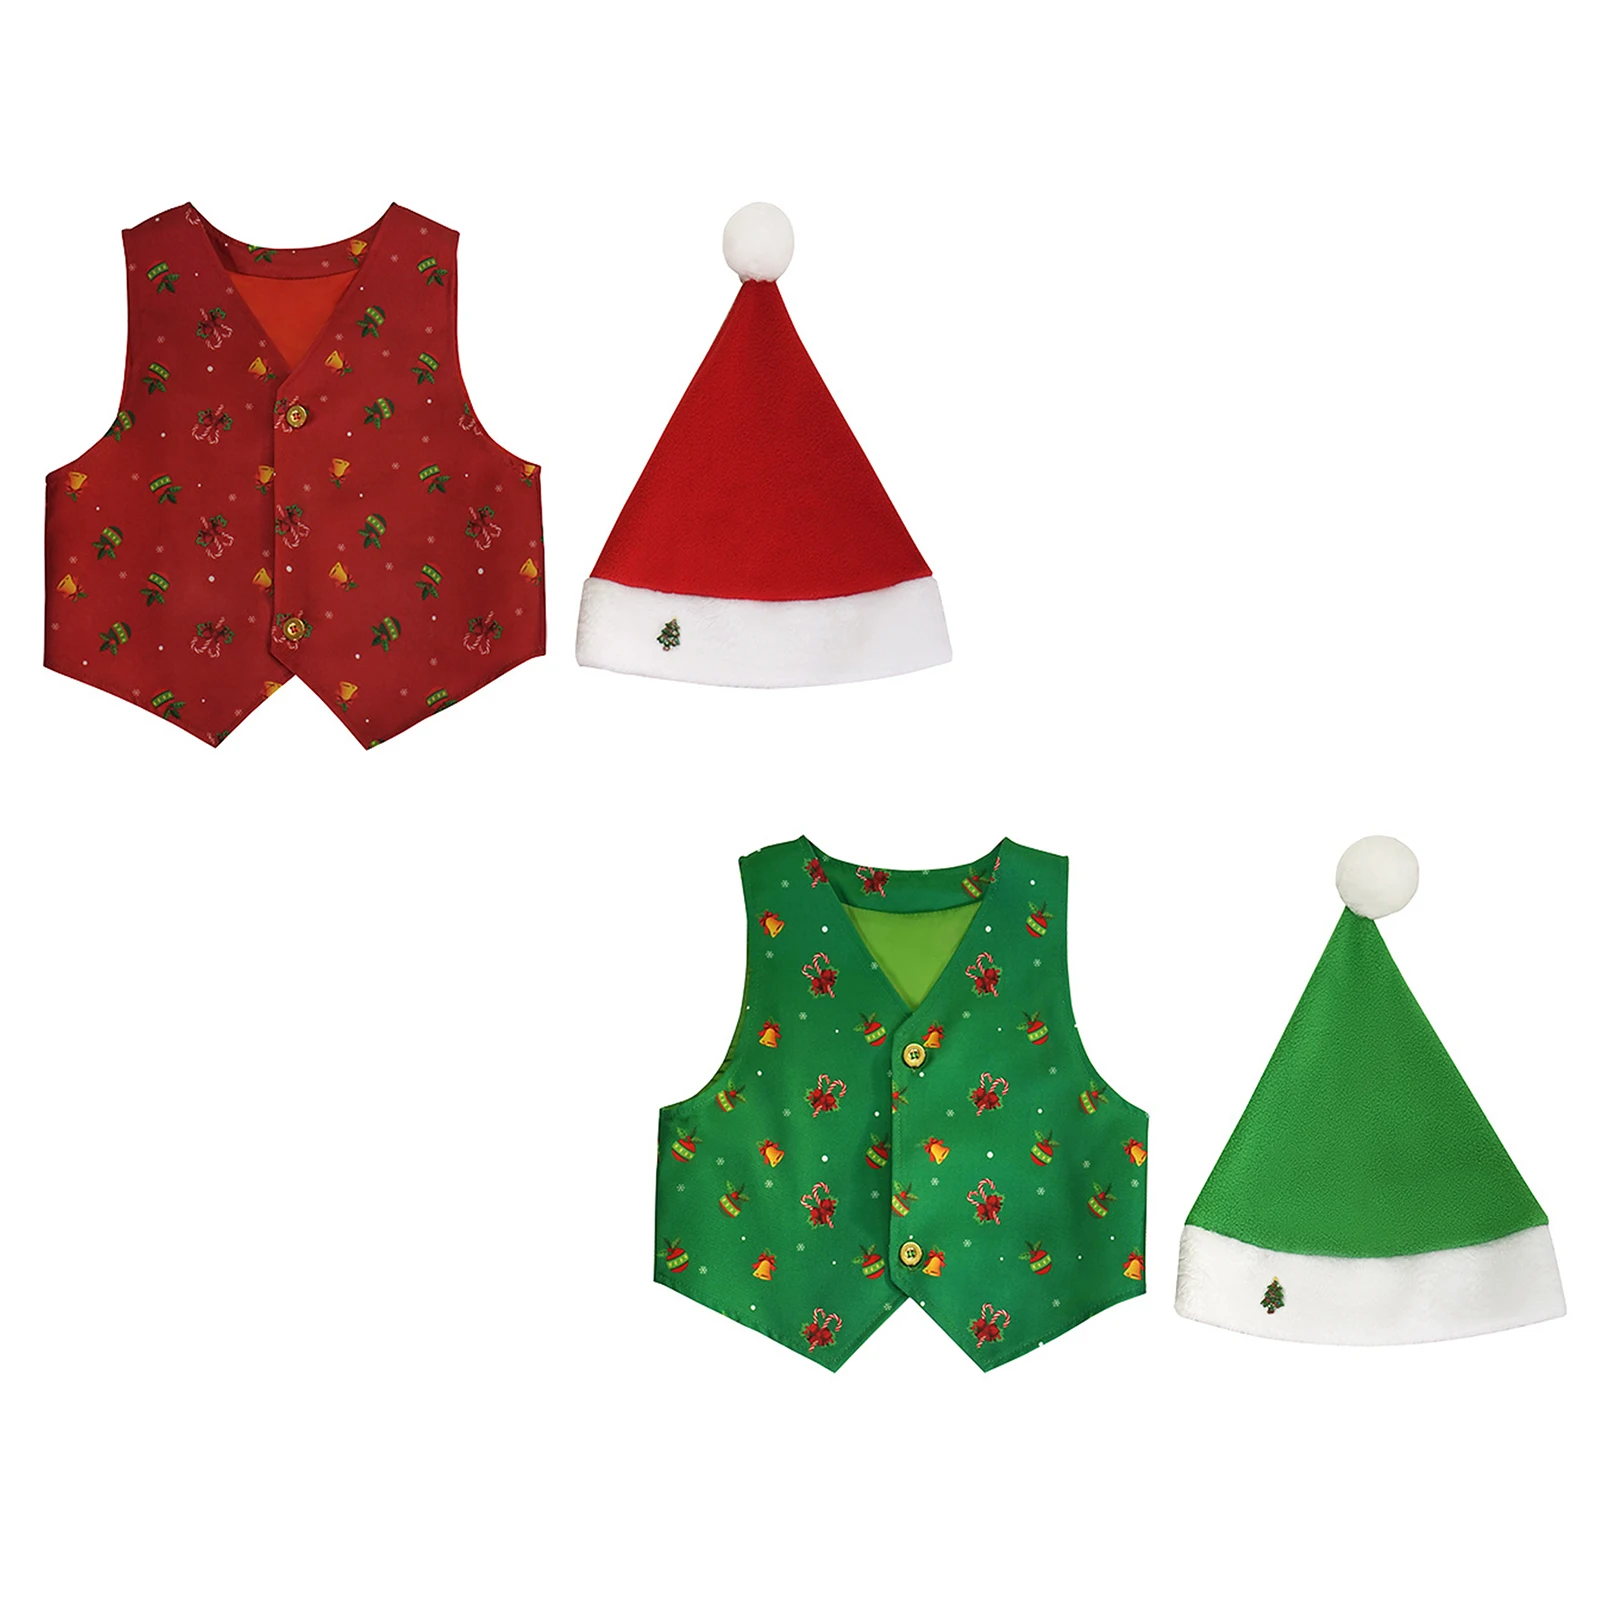 

New Christmas Elf Costumes Kids Cute Printed Vest Coat Santa Hat Sets for Xmas Party New Year Festivals Performance Waistcoat